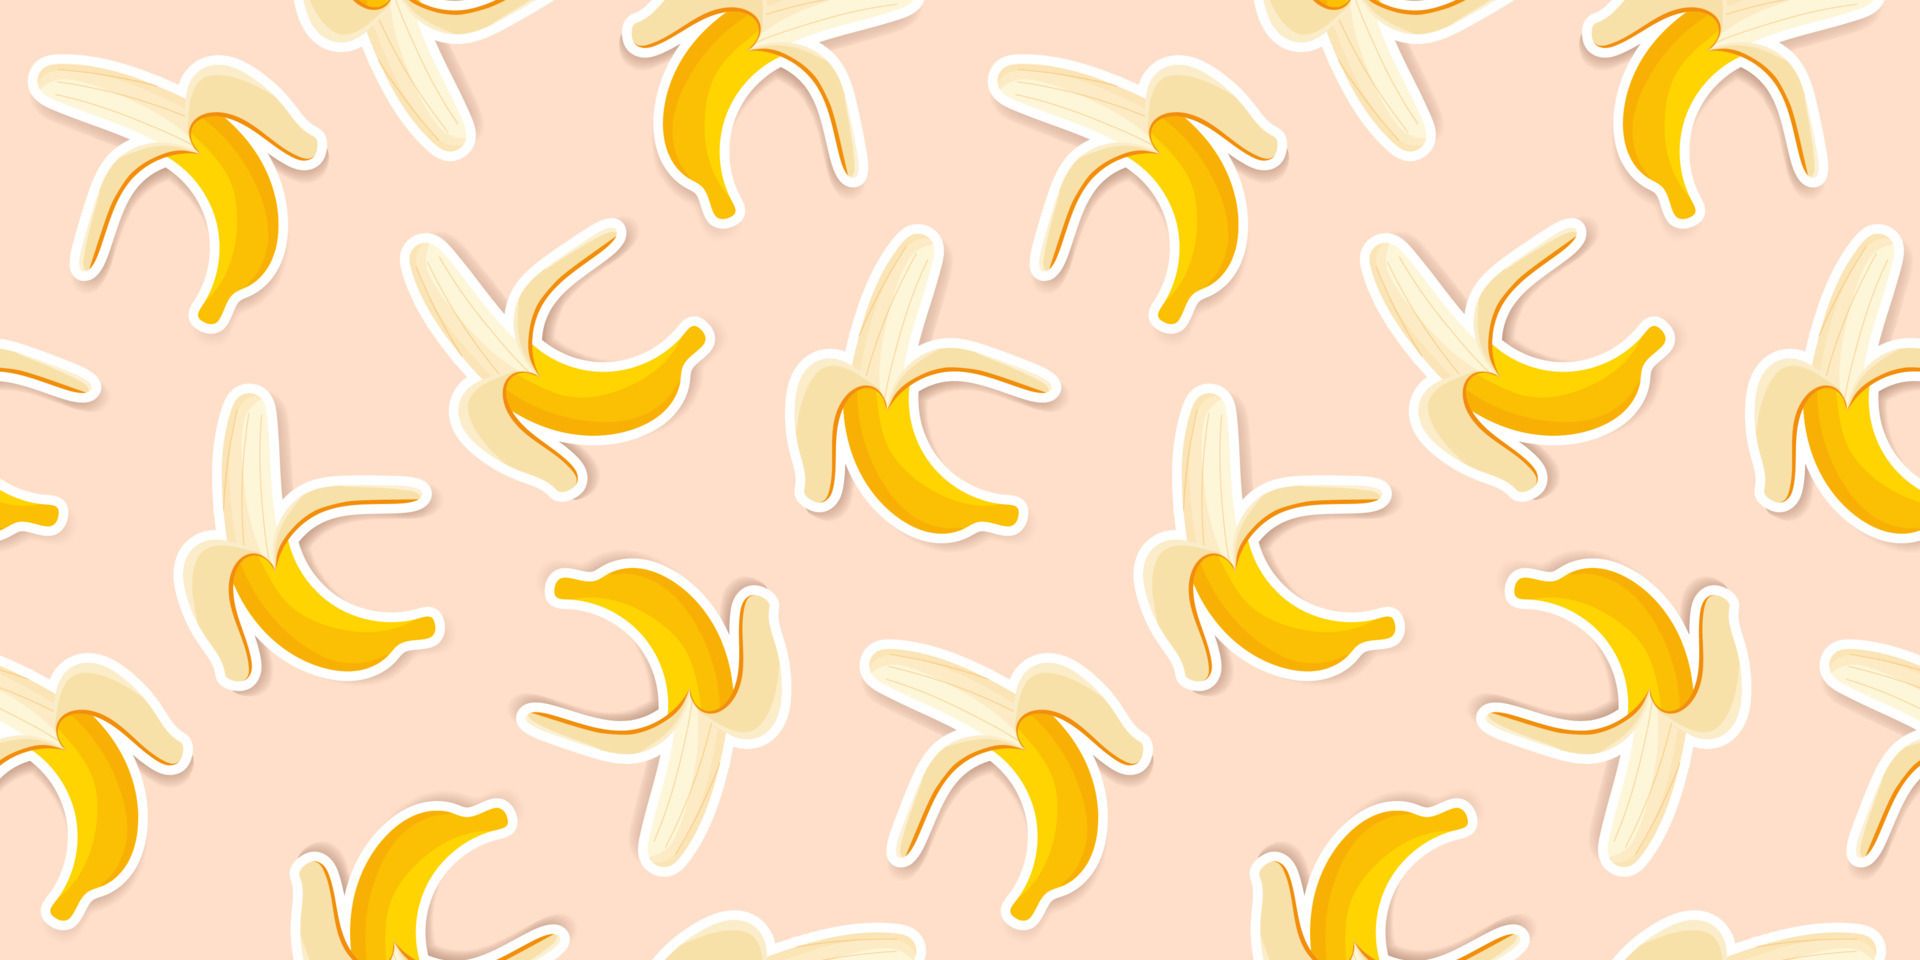 Cute yellow bananas on a coral background. Trendy banana pattern design for wallpaper, print, fabric and stationery design. Yellow banana sticker pattern. Illustrated vector fruit